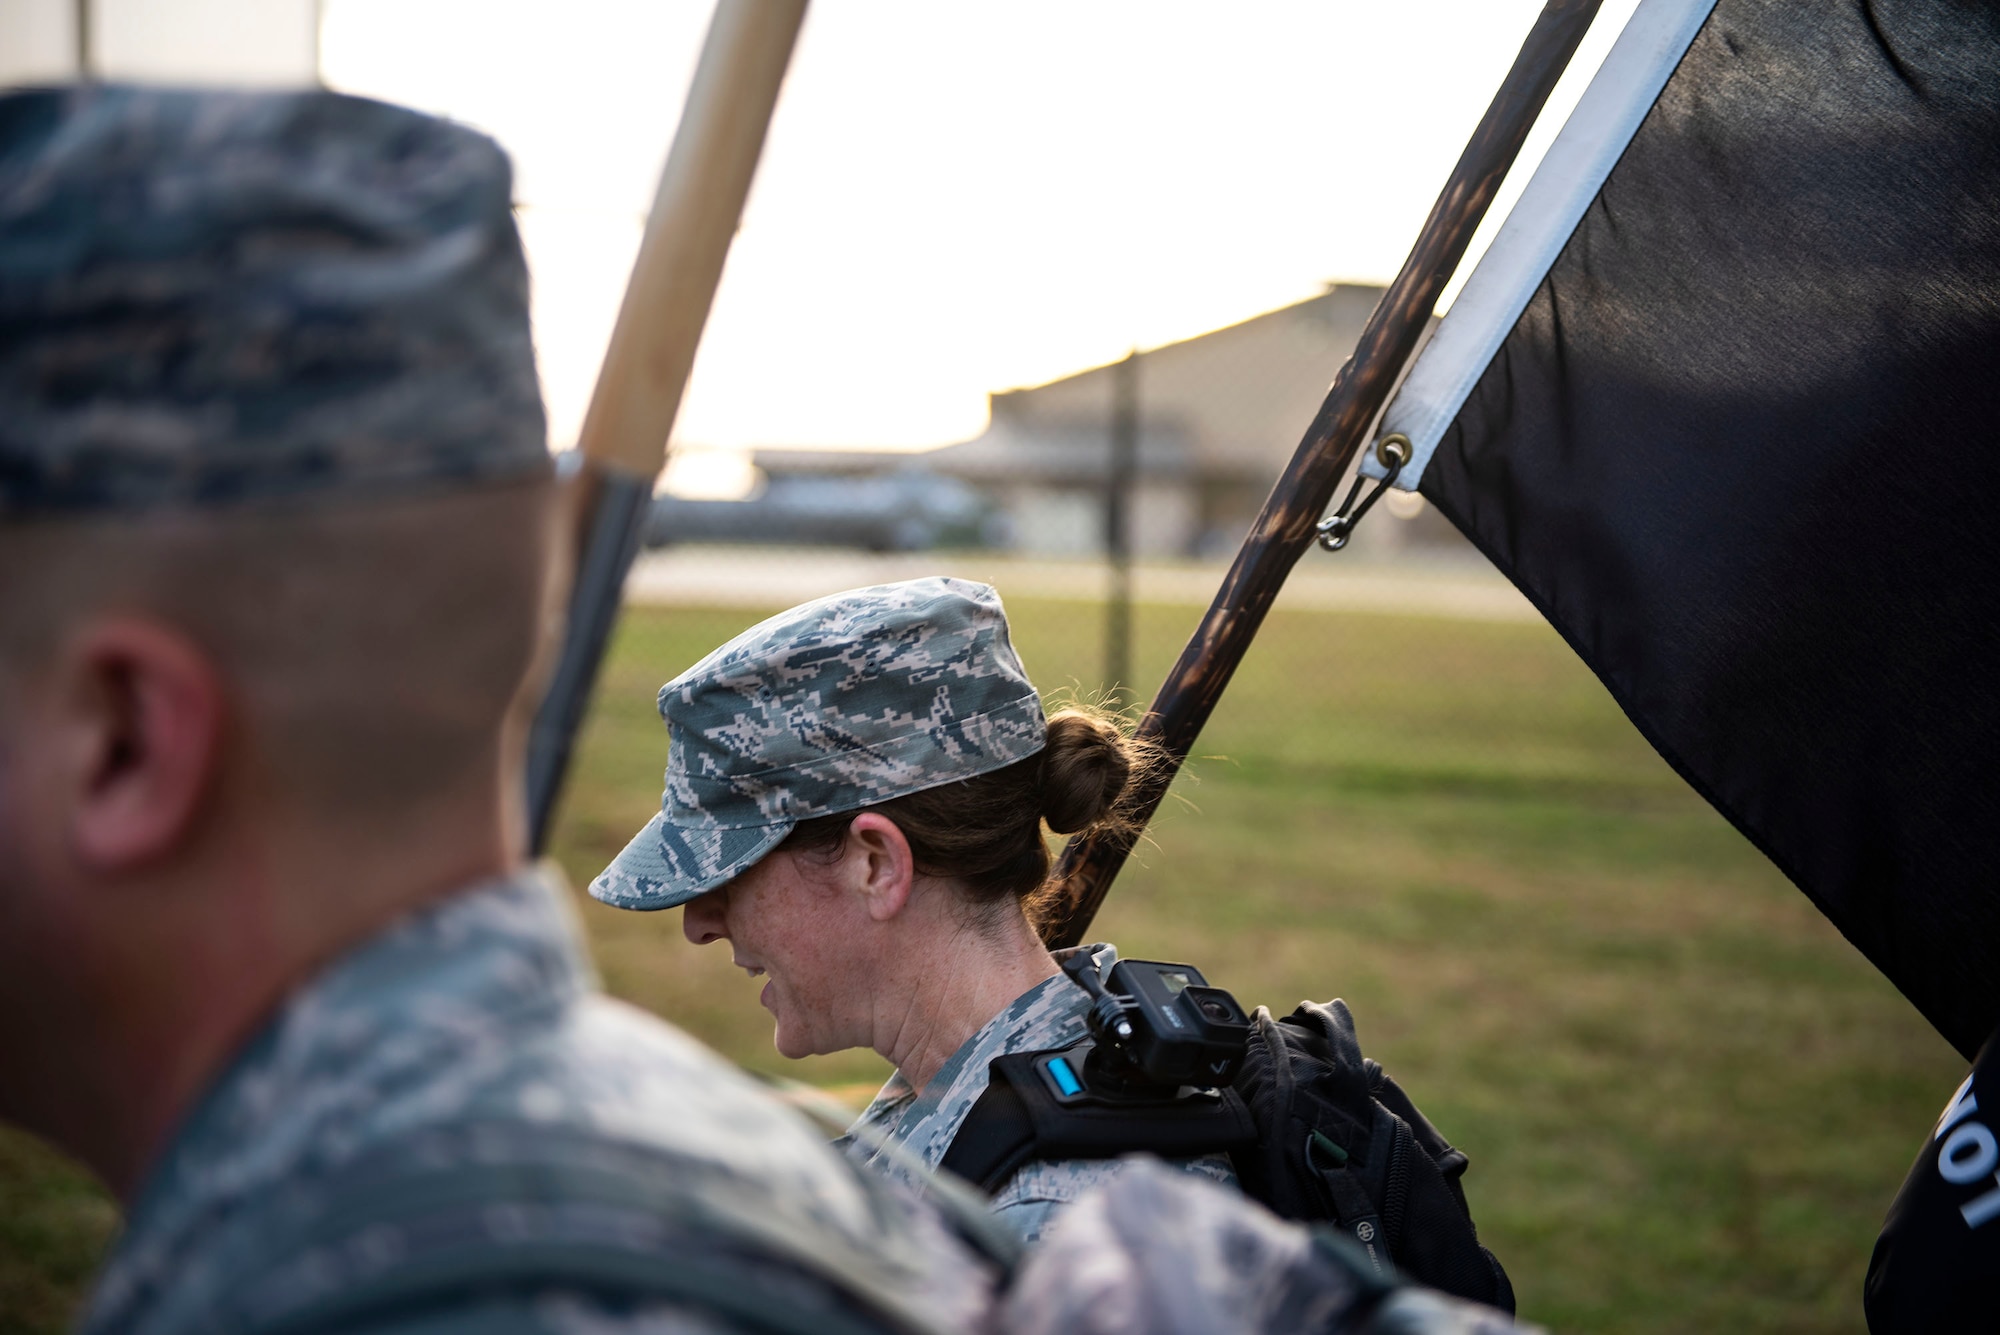 Master Sgt. Anna Gee, 476th Fighter Group metals technology shop chief, participates in the POW/MIA Recognition Day ruck march Sept. 20, 2019, at Moody Air Force Base, Ga. The 347th Operations Support Squadron hosted the 24-hour ruck march to pay tribute to those who’ve been captured or missing in the line of duty. (U.S. Air Force photo by Senior Airman Erick Requadt)